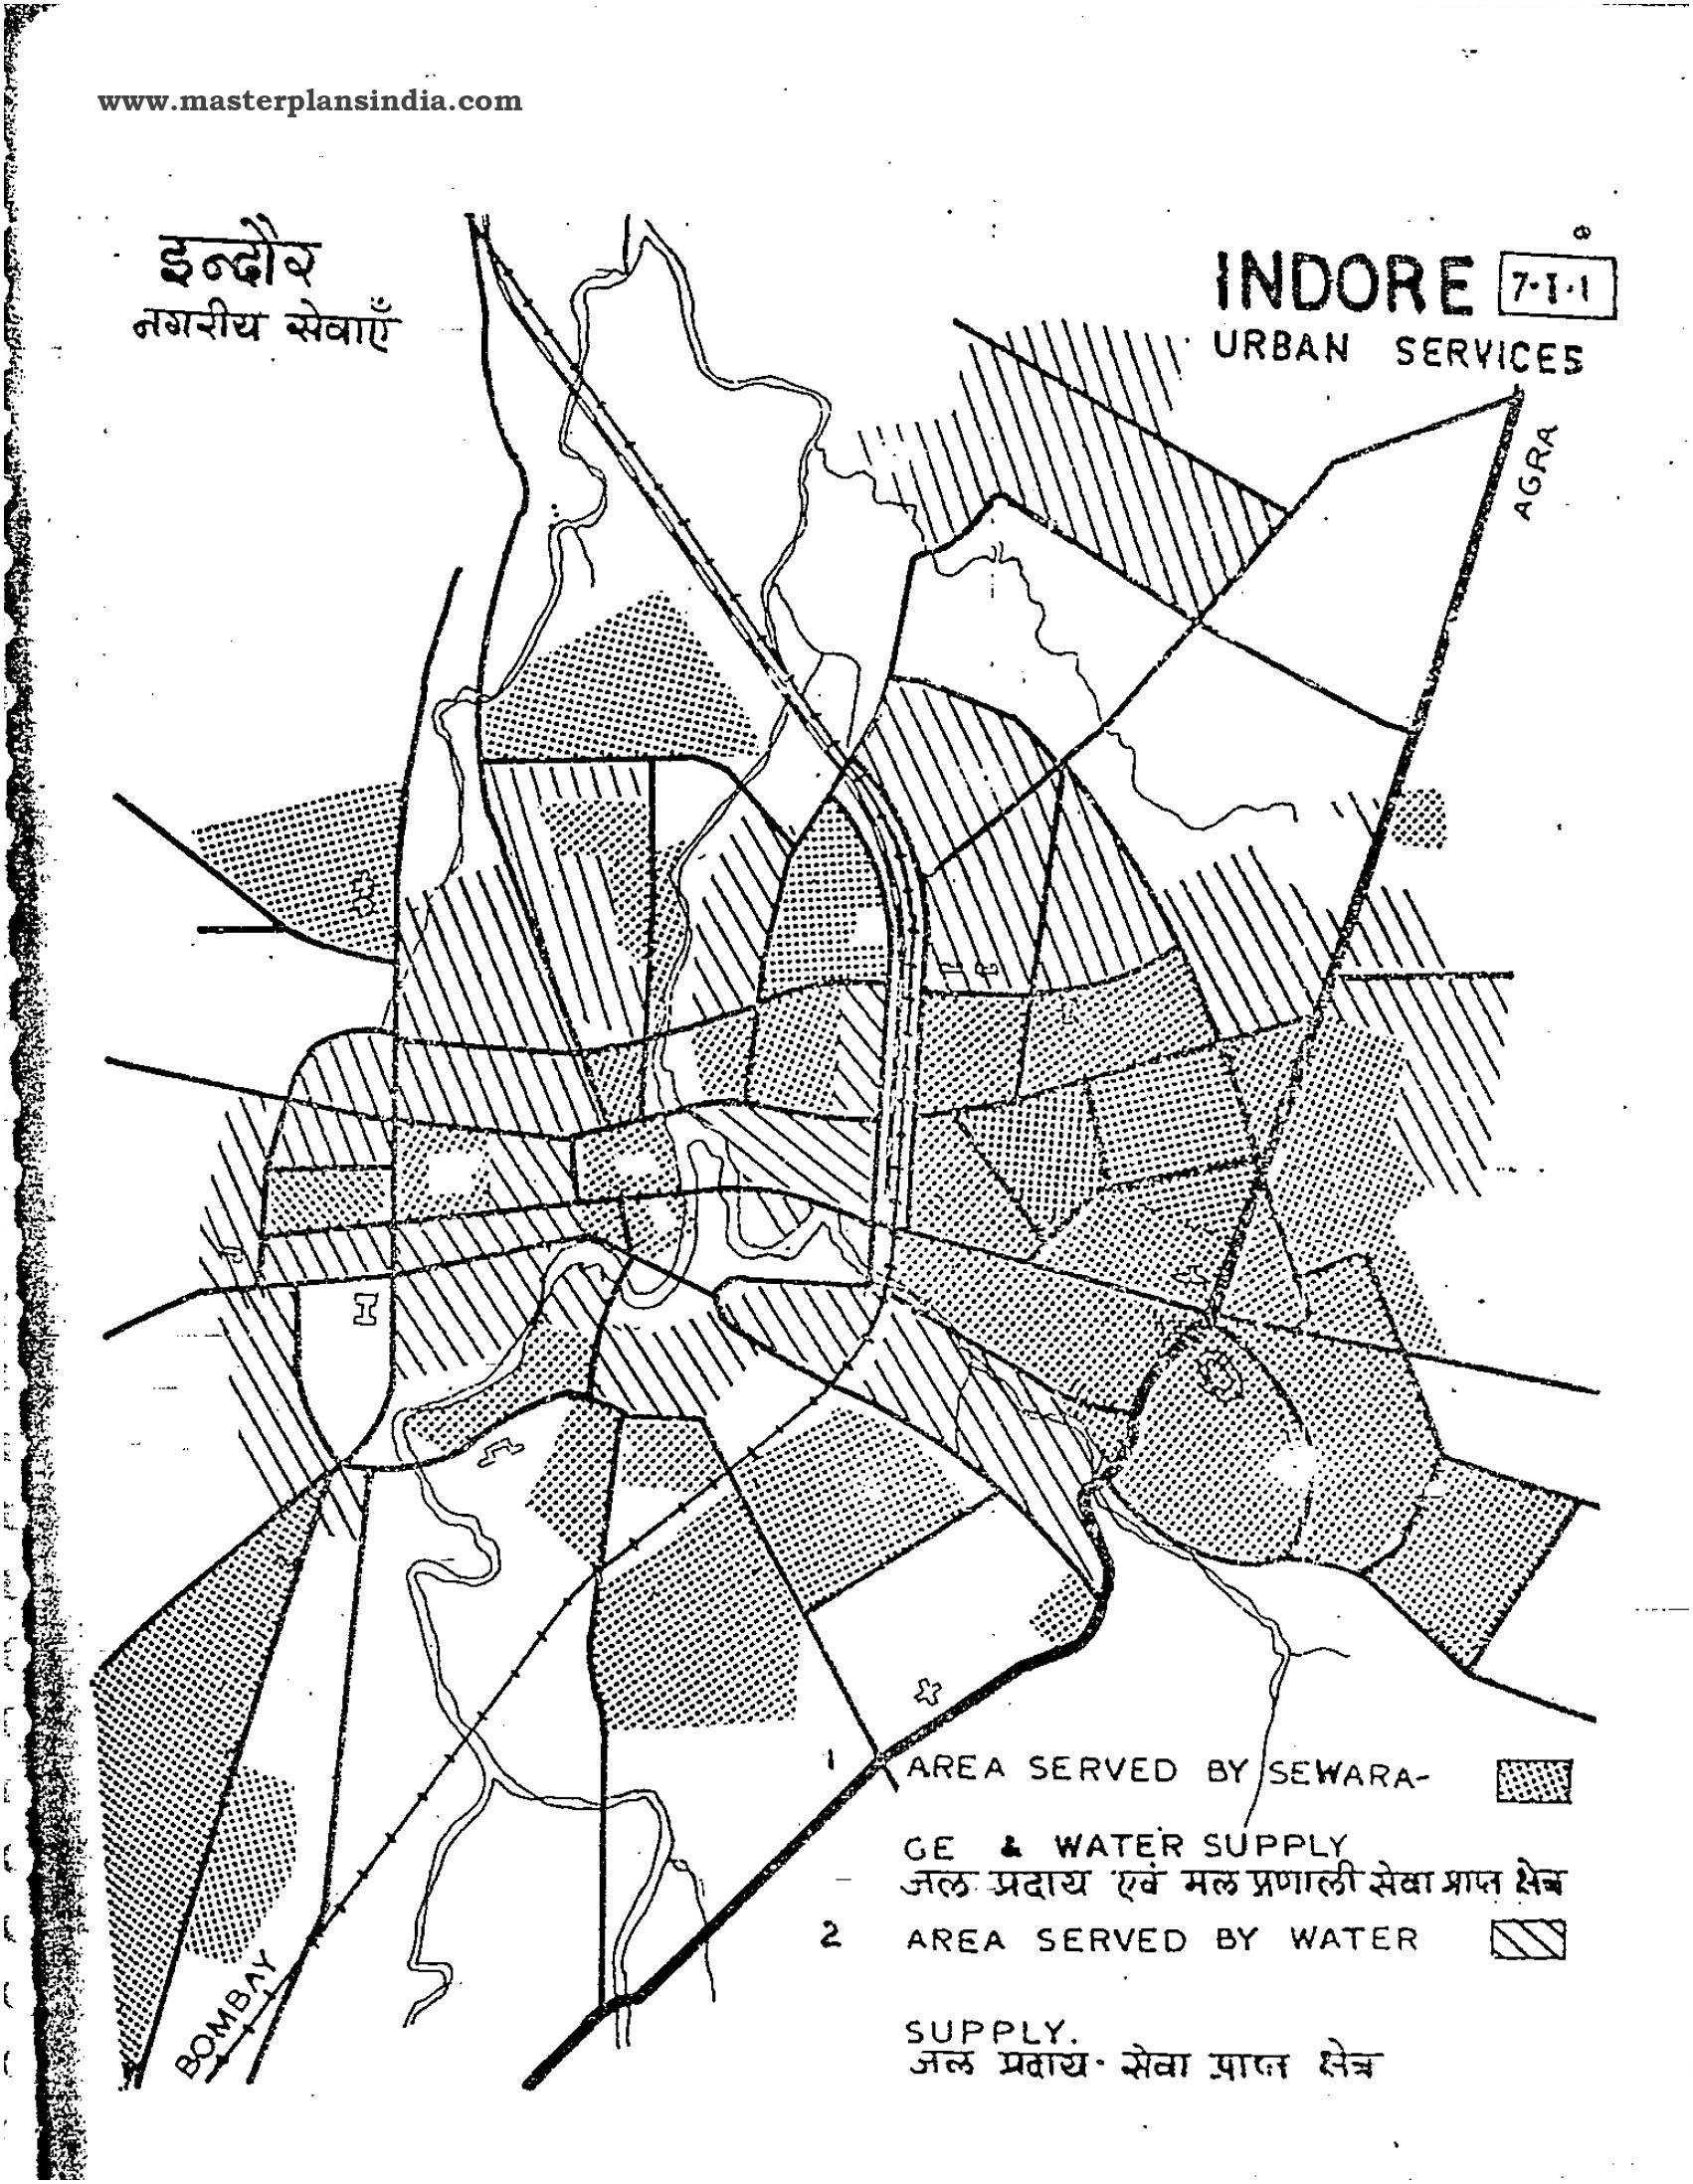 Indore Urban Services Map 